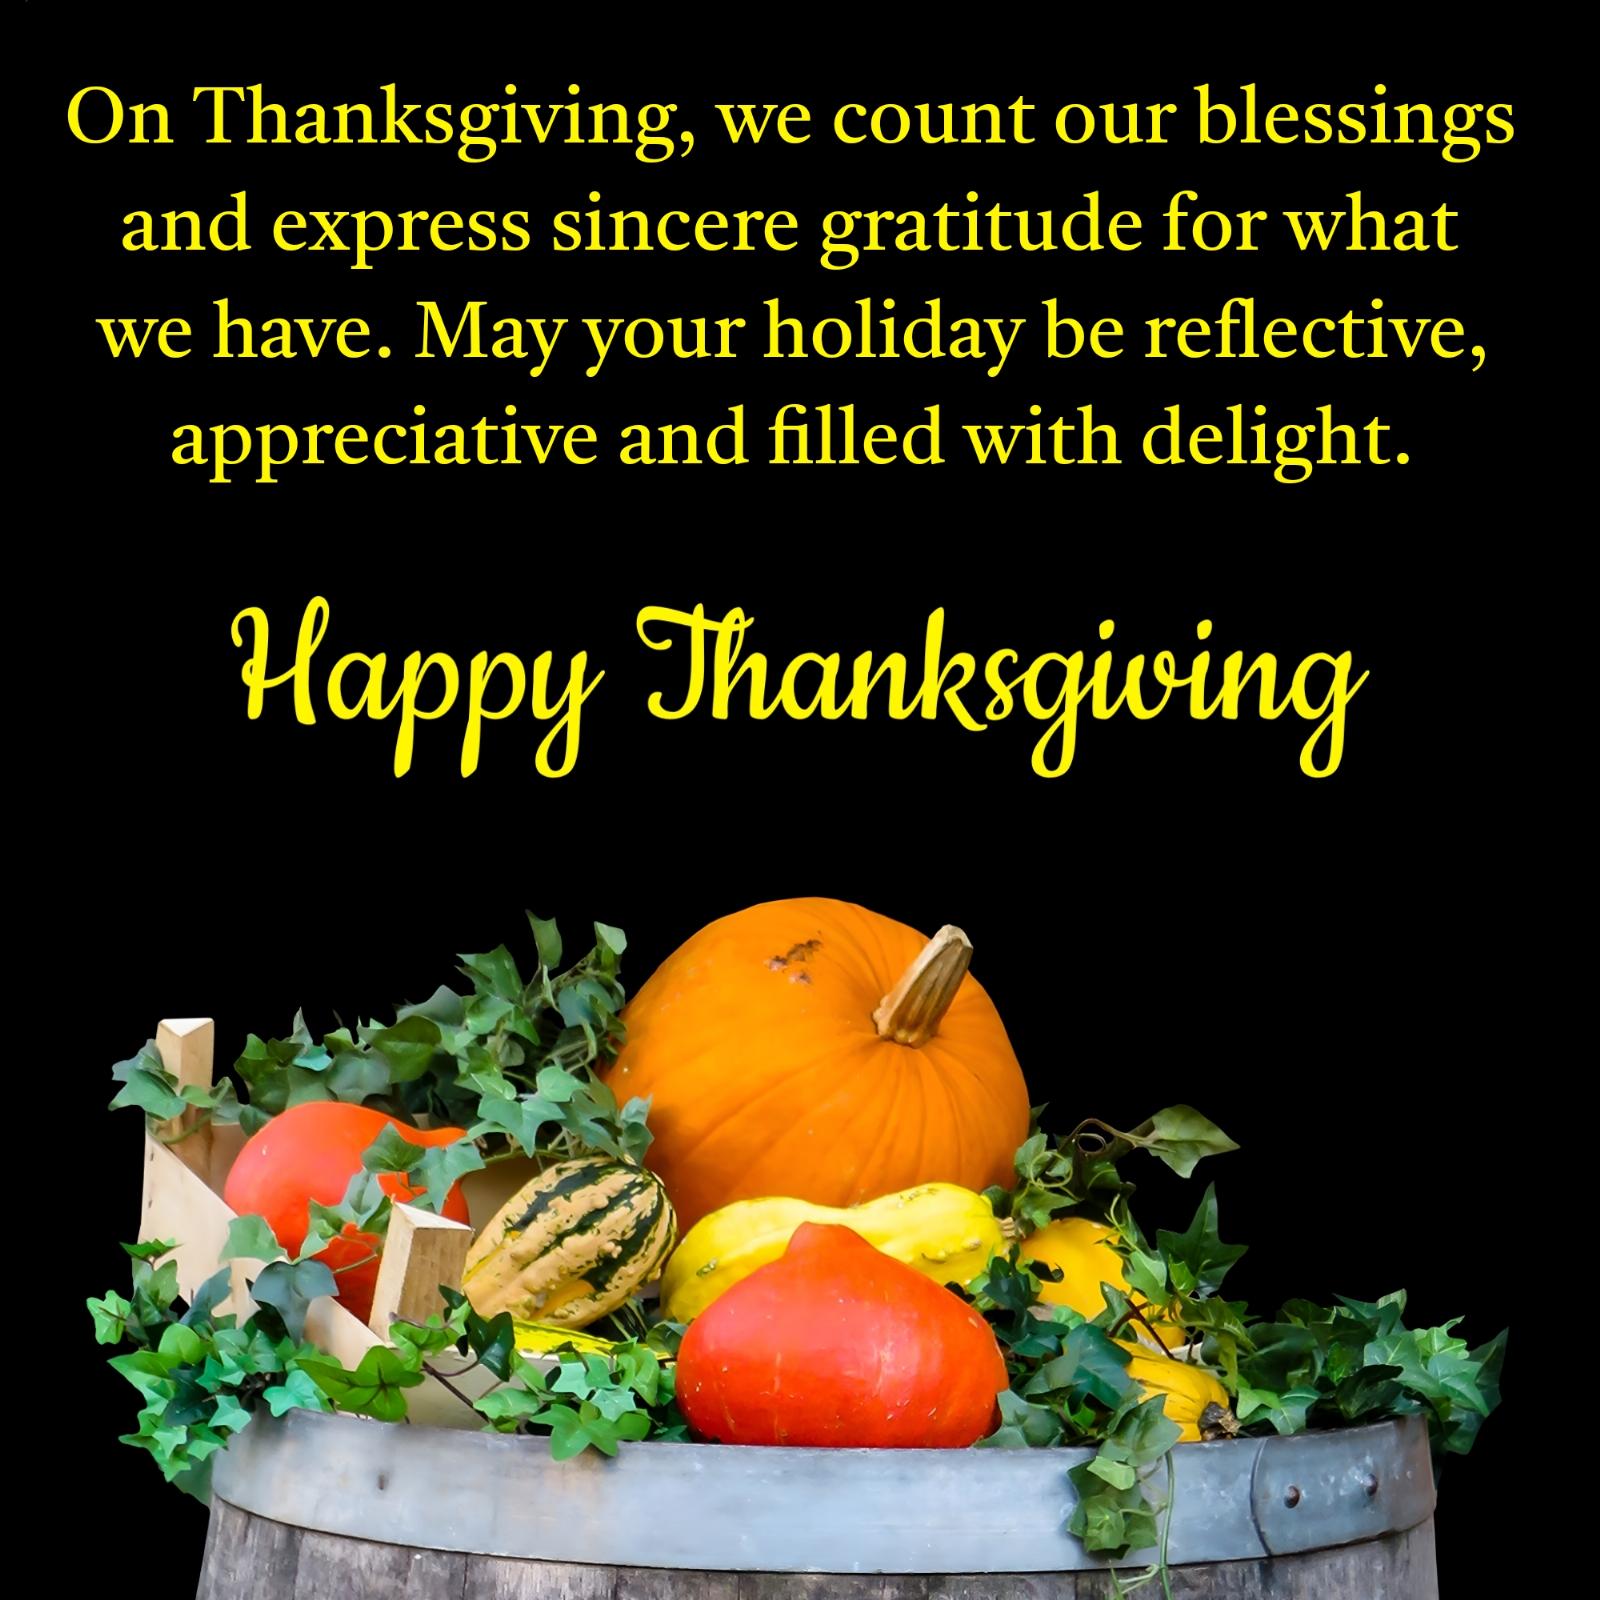 On Thanksgiving we count our blessings and express sincere gratitude for what we have